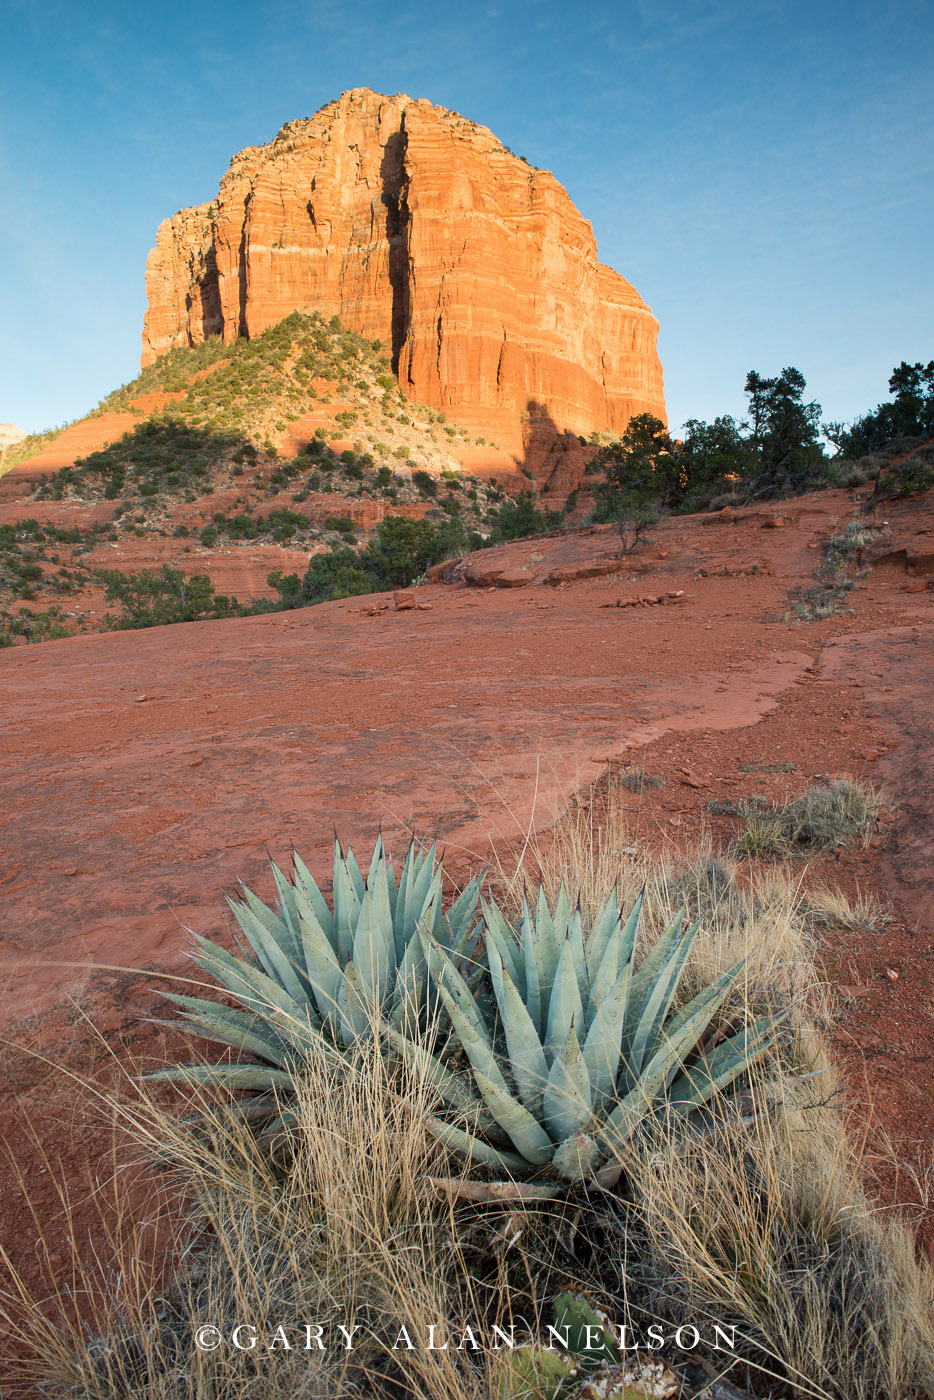 Agave plants and courthouse rock, red rock country of Sedona, Arizona